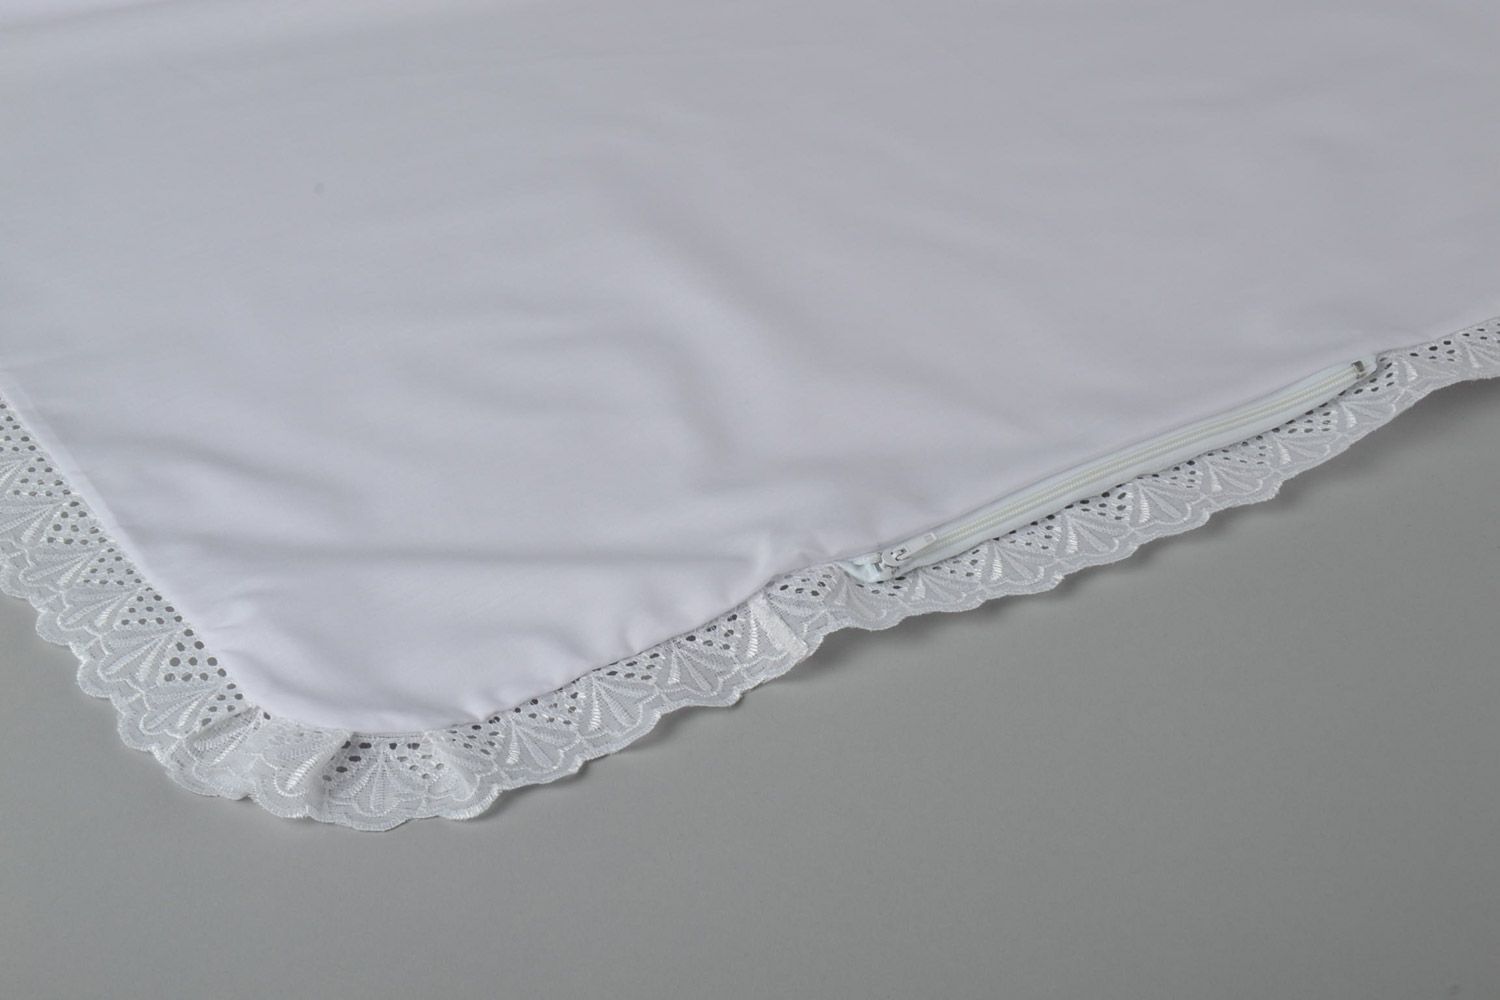 Handmade designer white cotton baby christening blanket with embroidered flowers photo 3